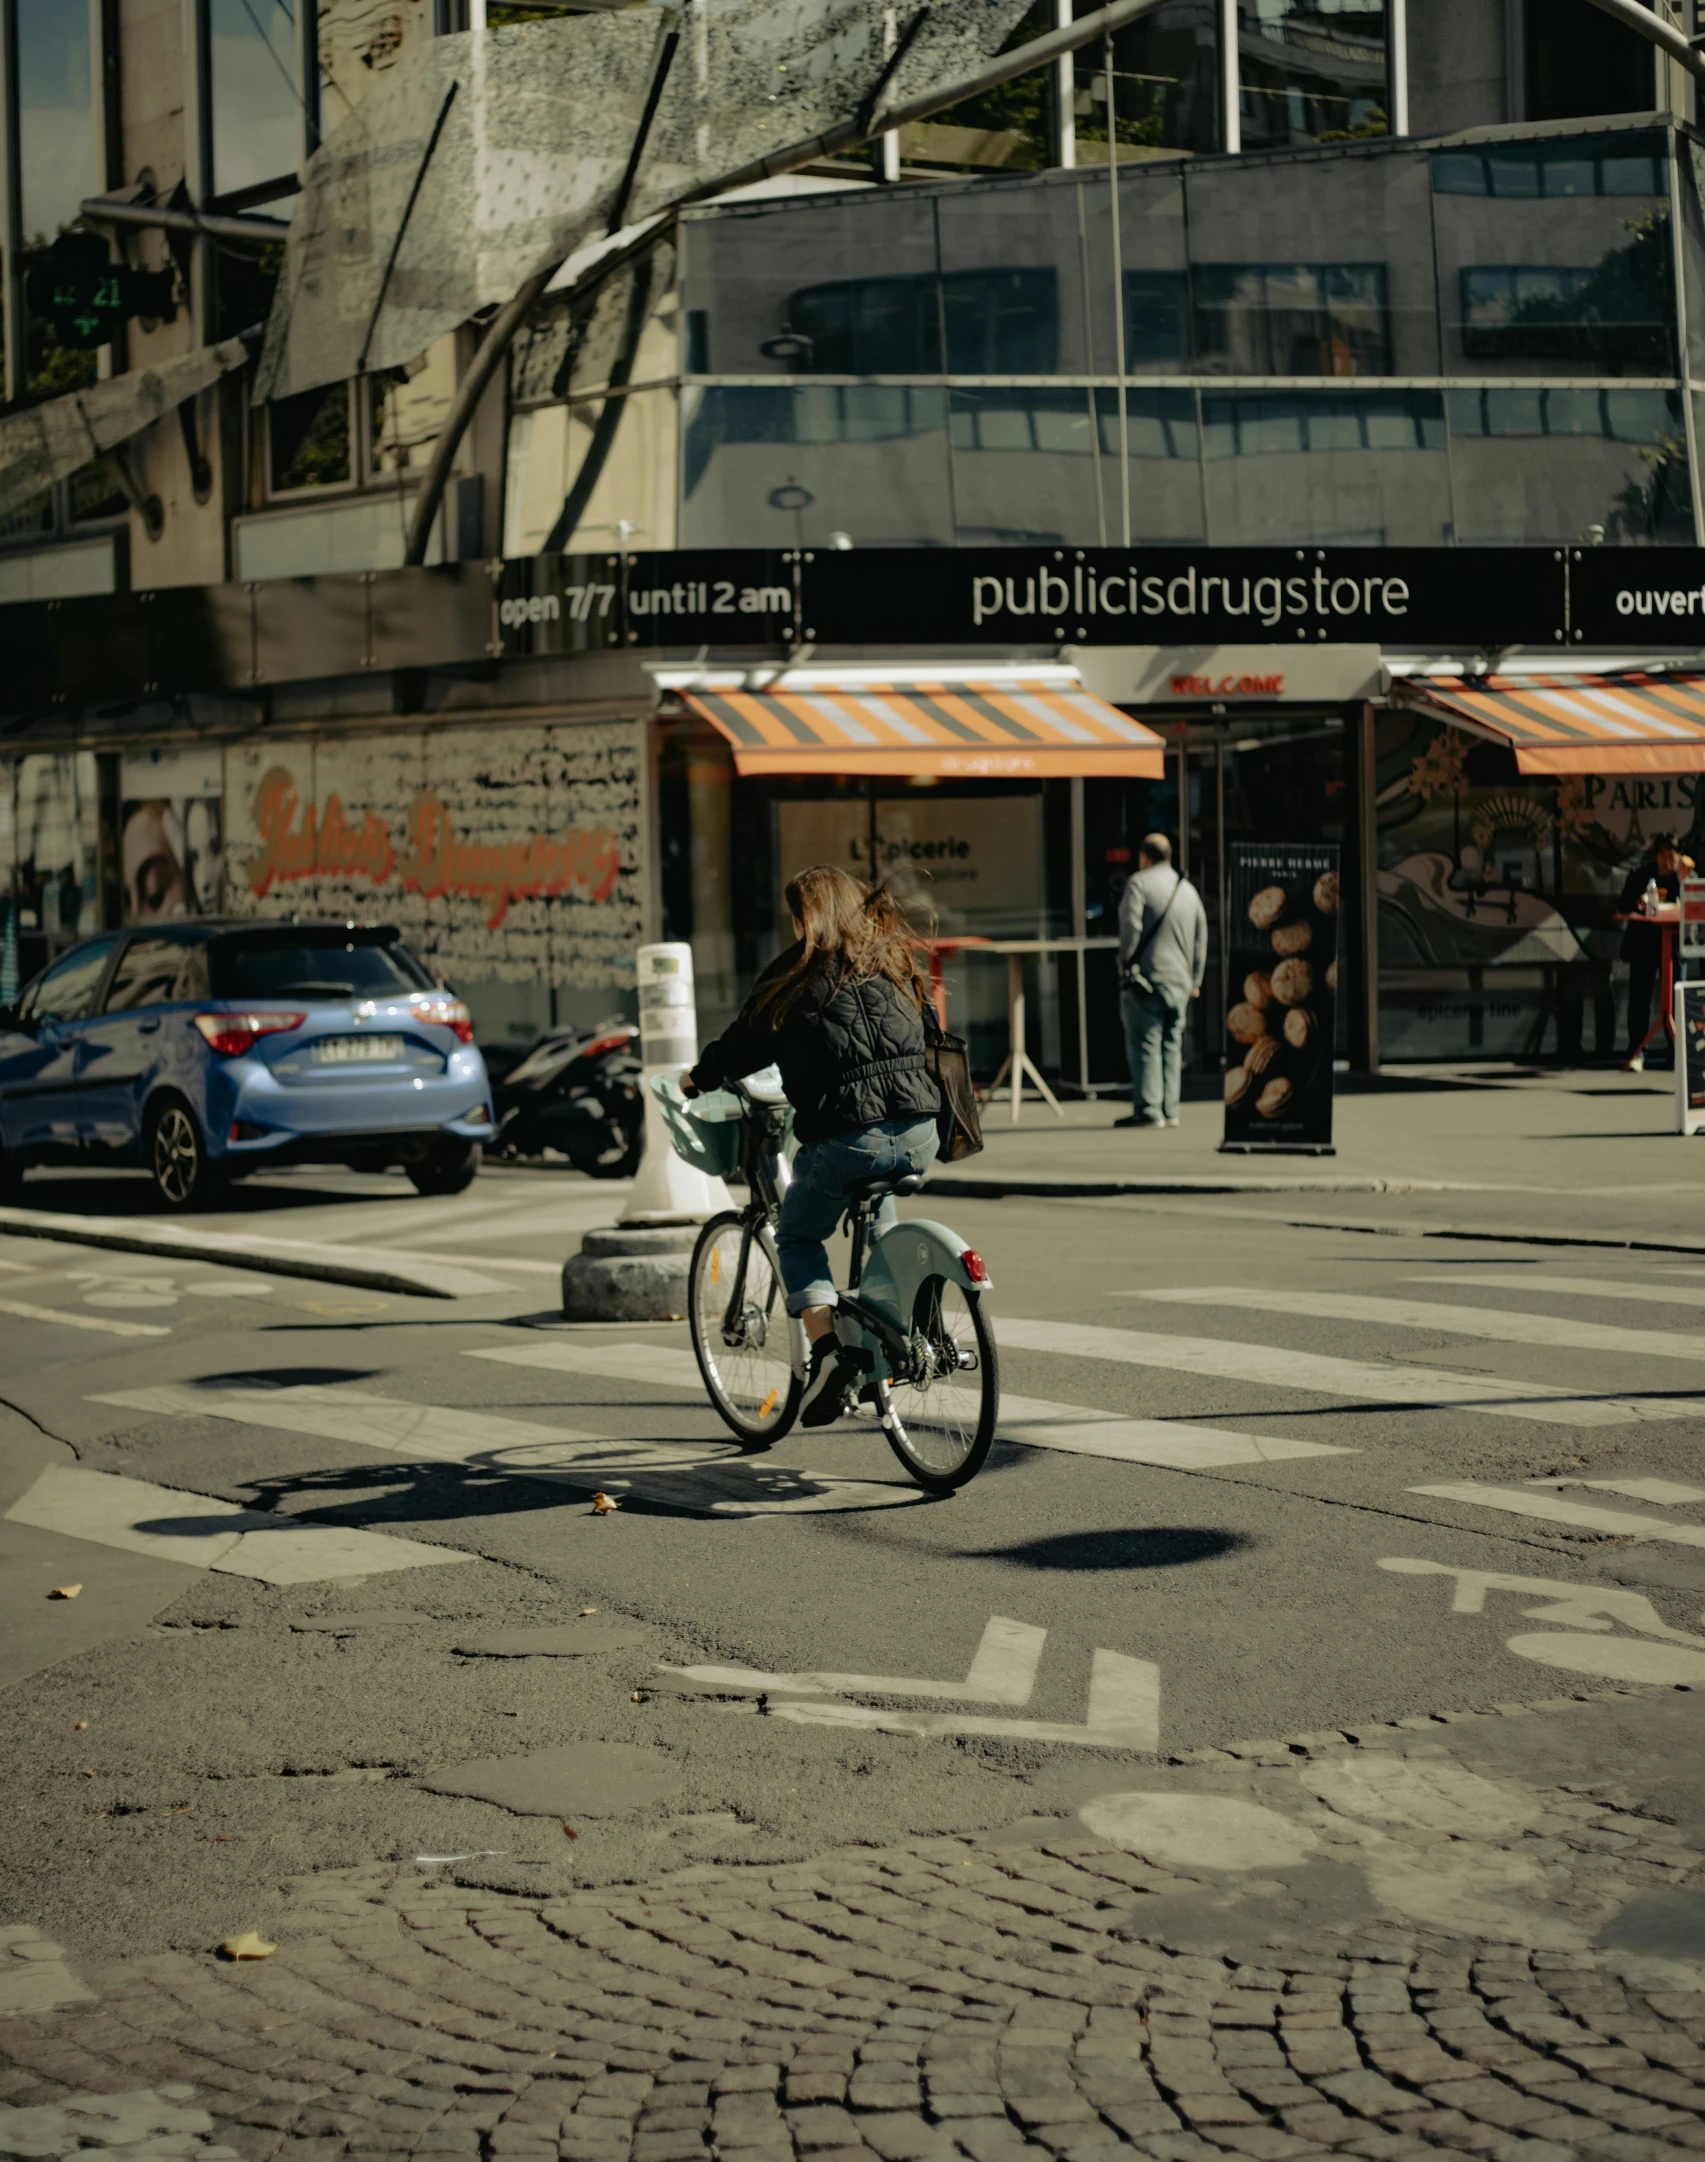 a bicyclist passing through a cross walk area on a busy street